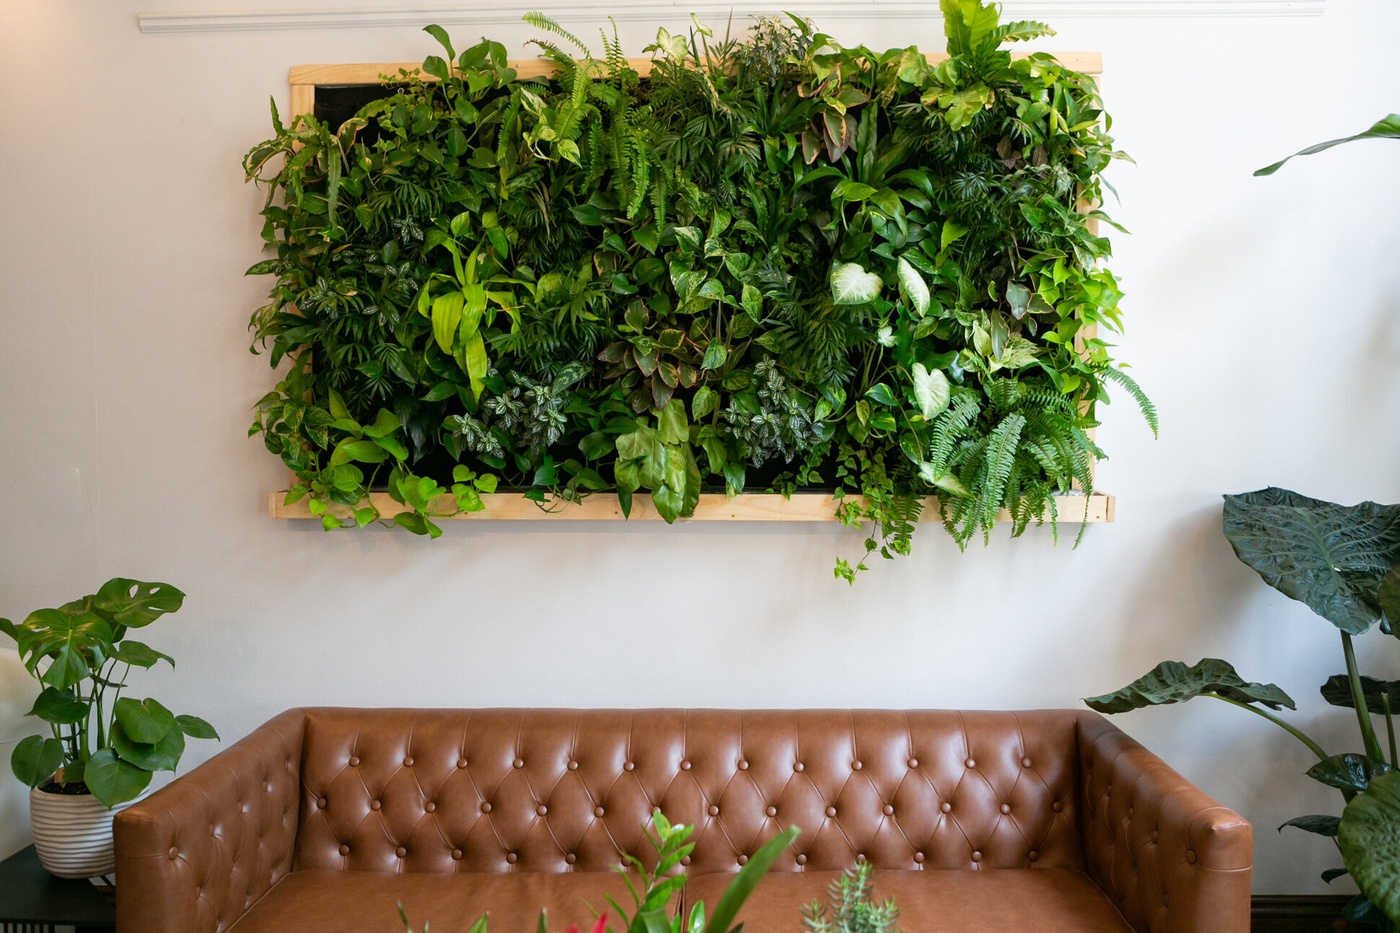 How much does a vertical garden cost?